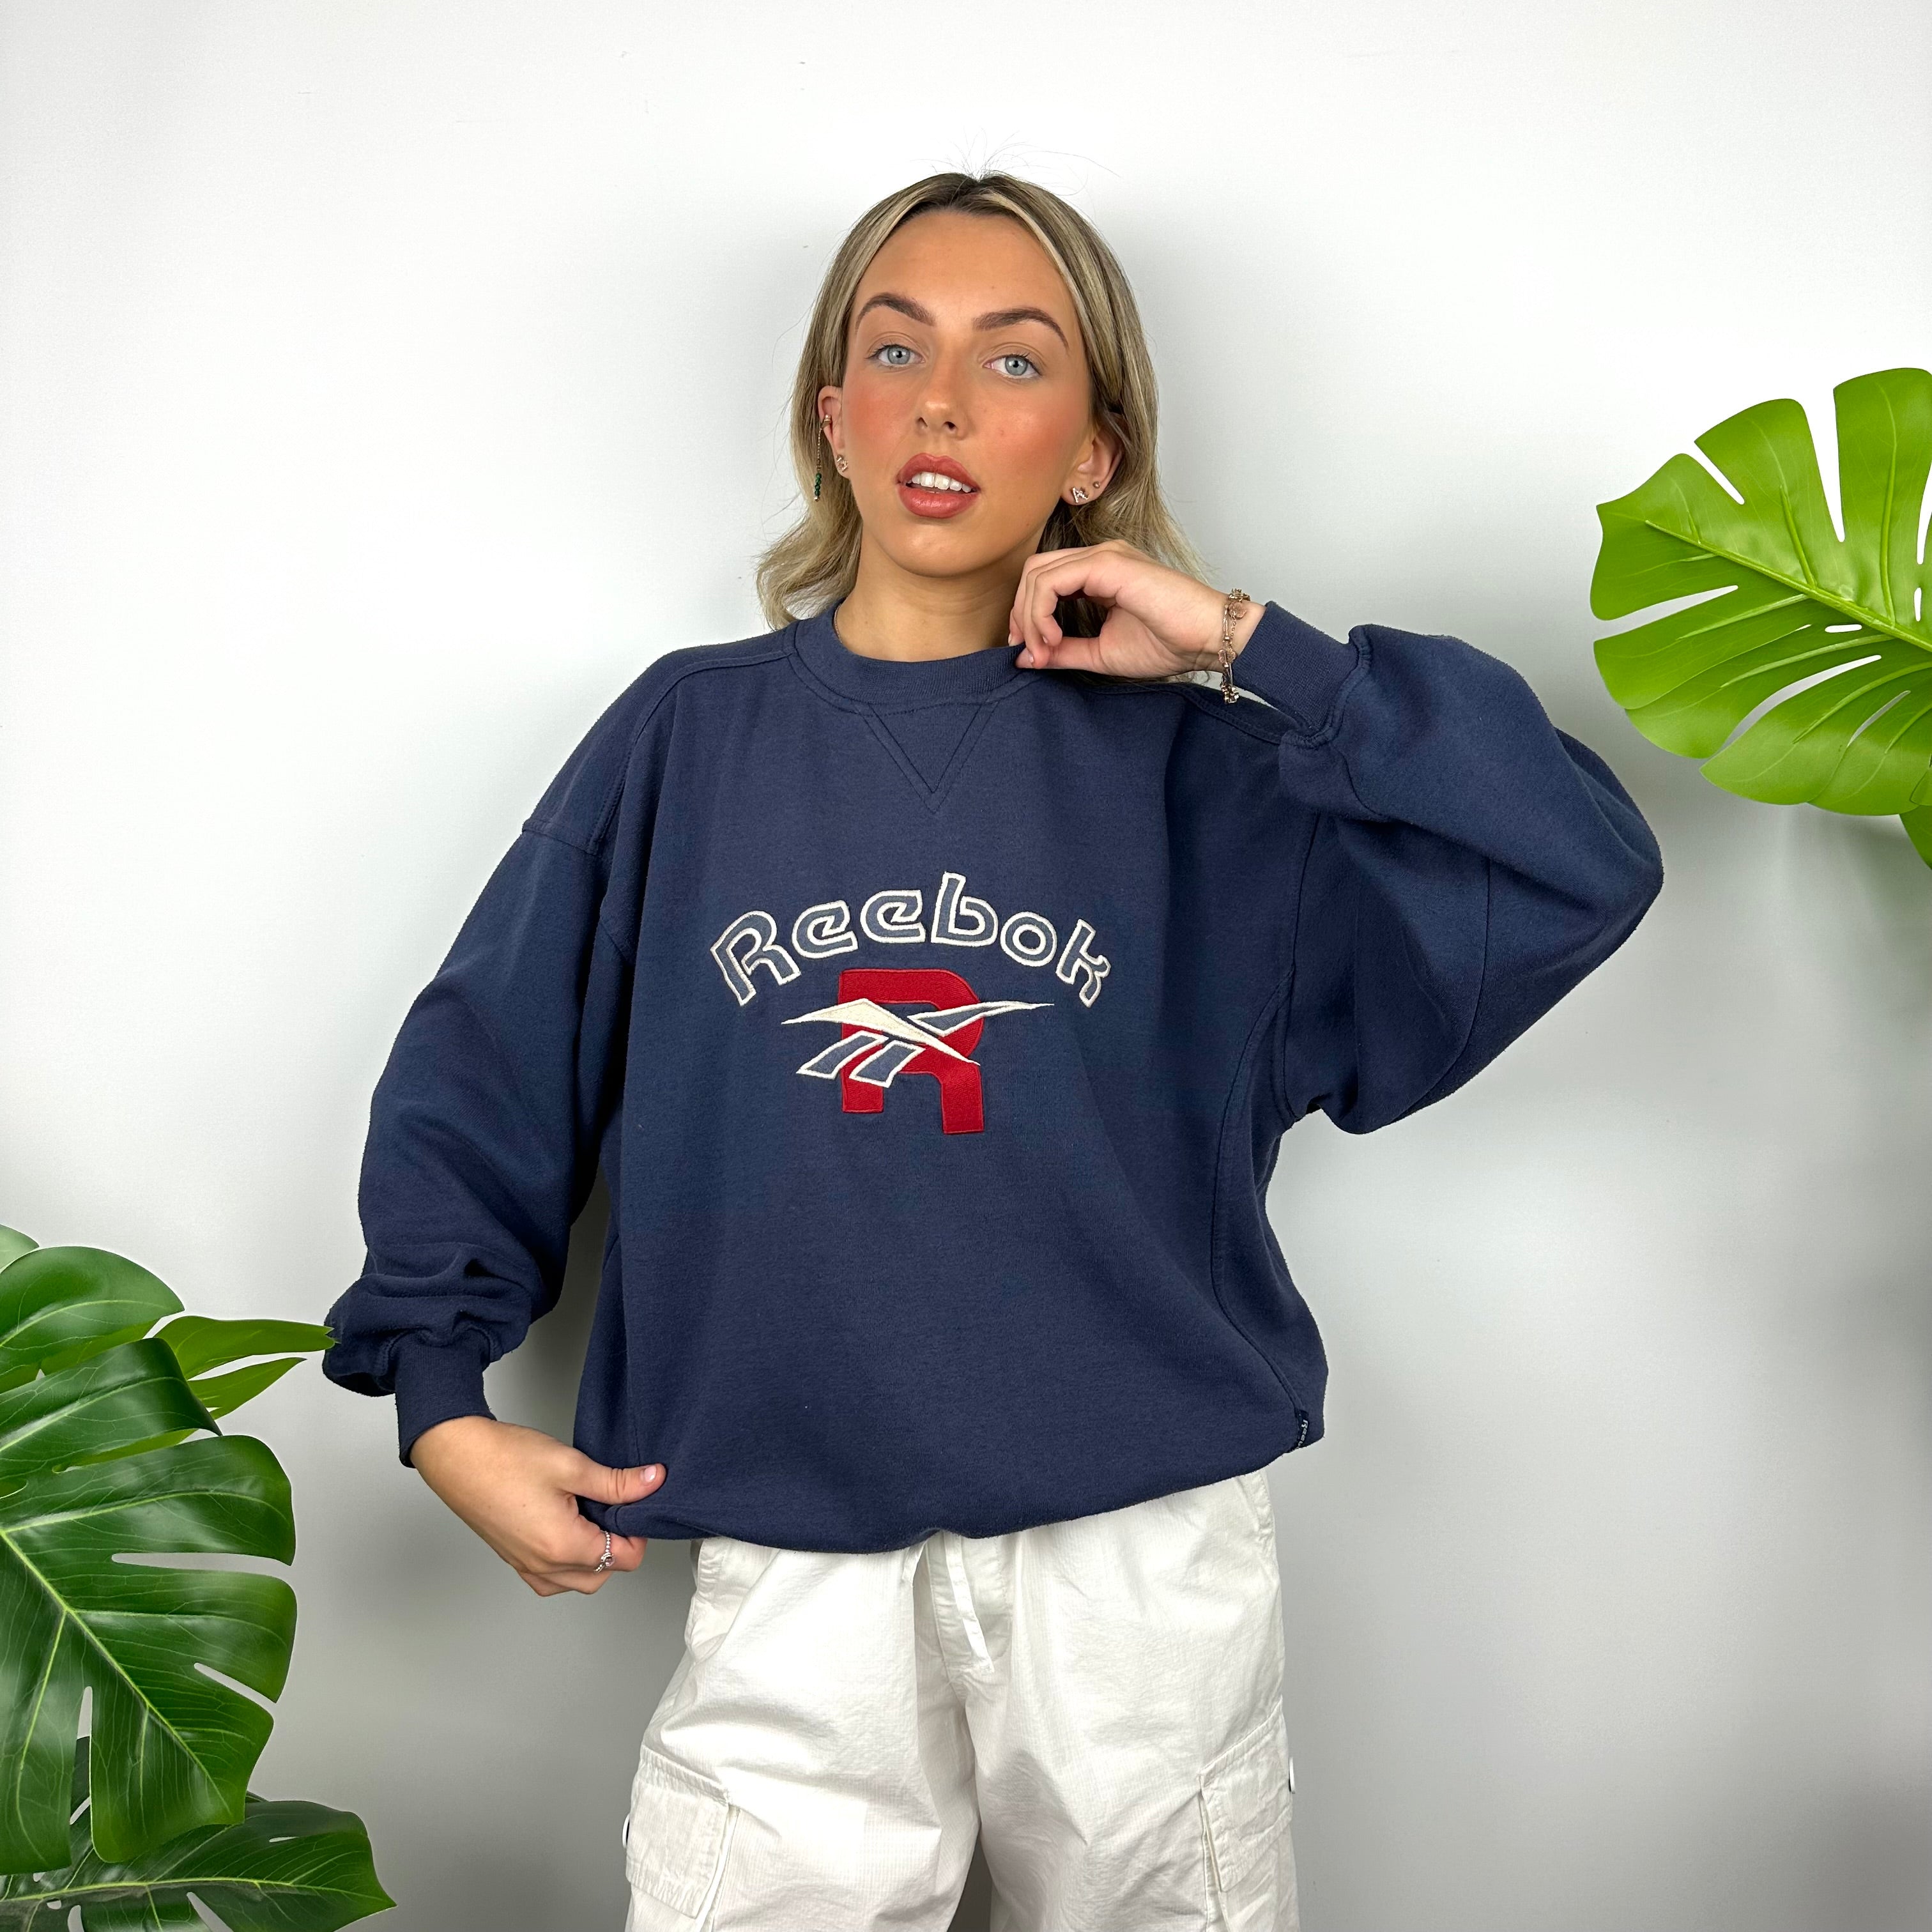 Reebok Navy Embroidered Spell Out Sweatshirt (M)